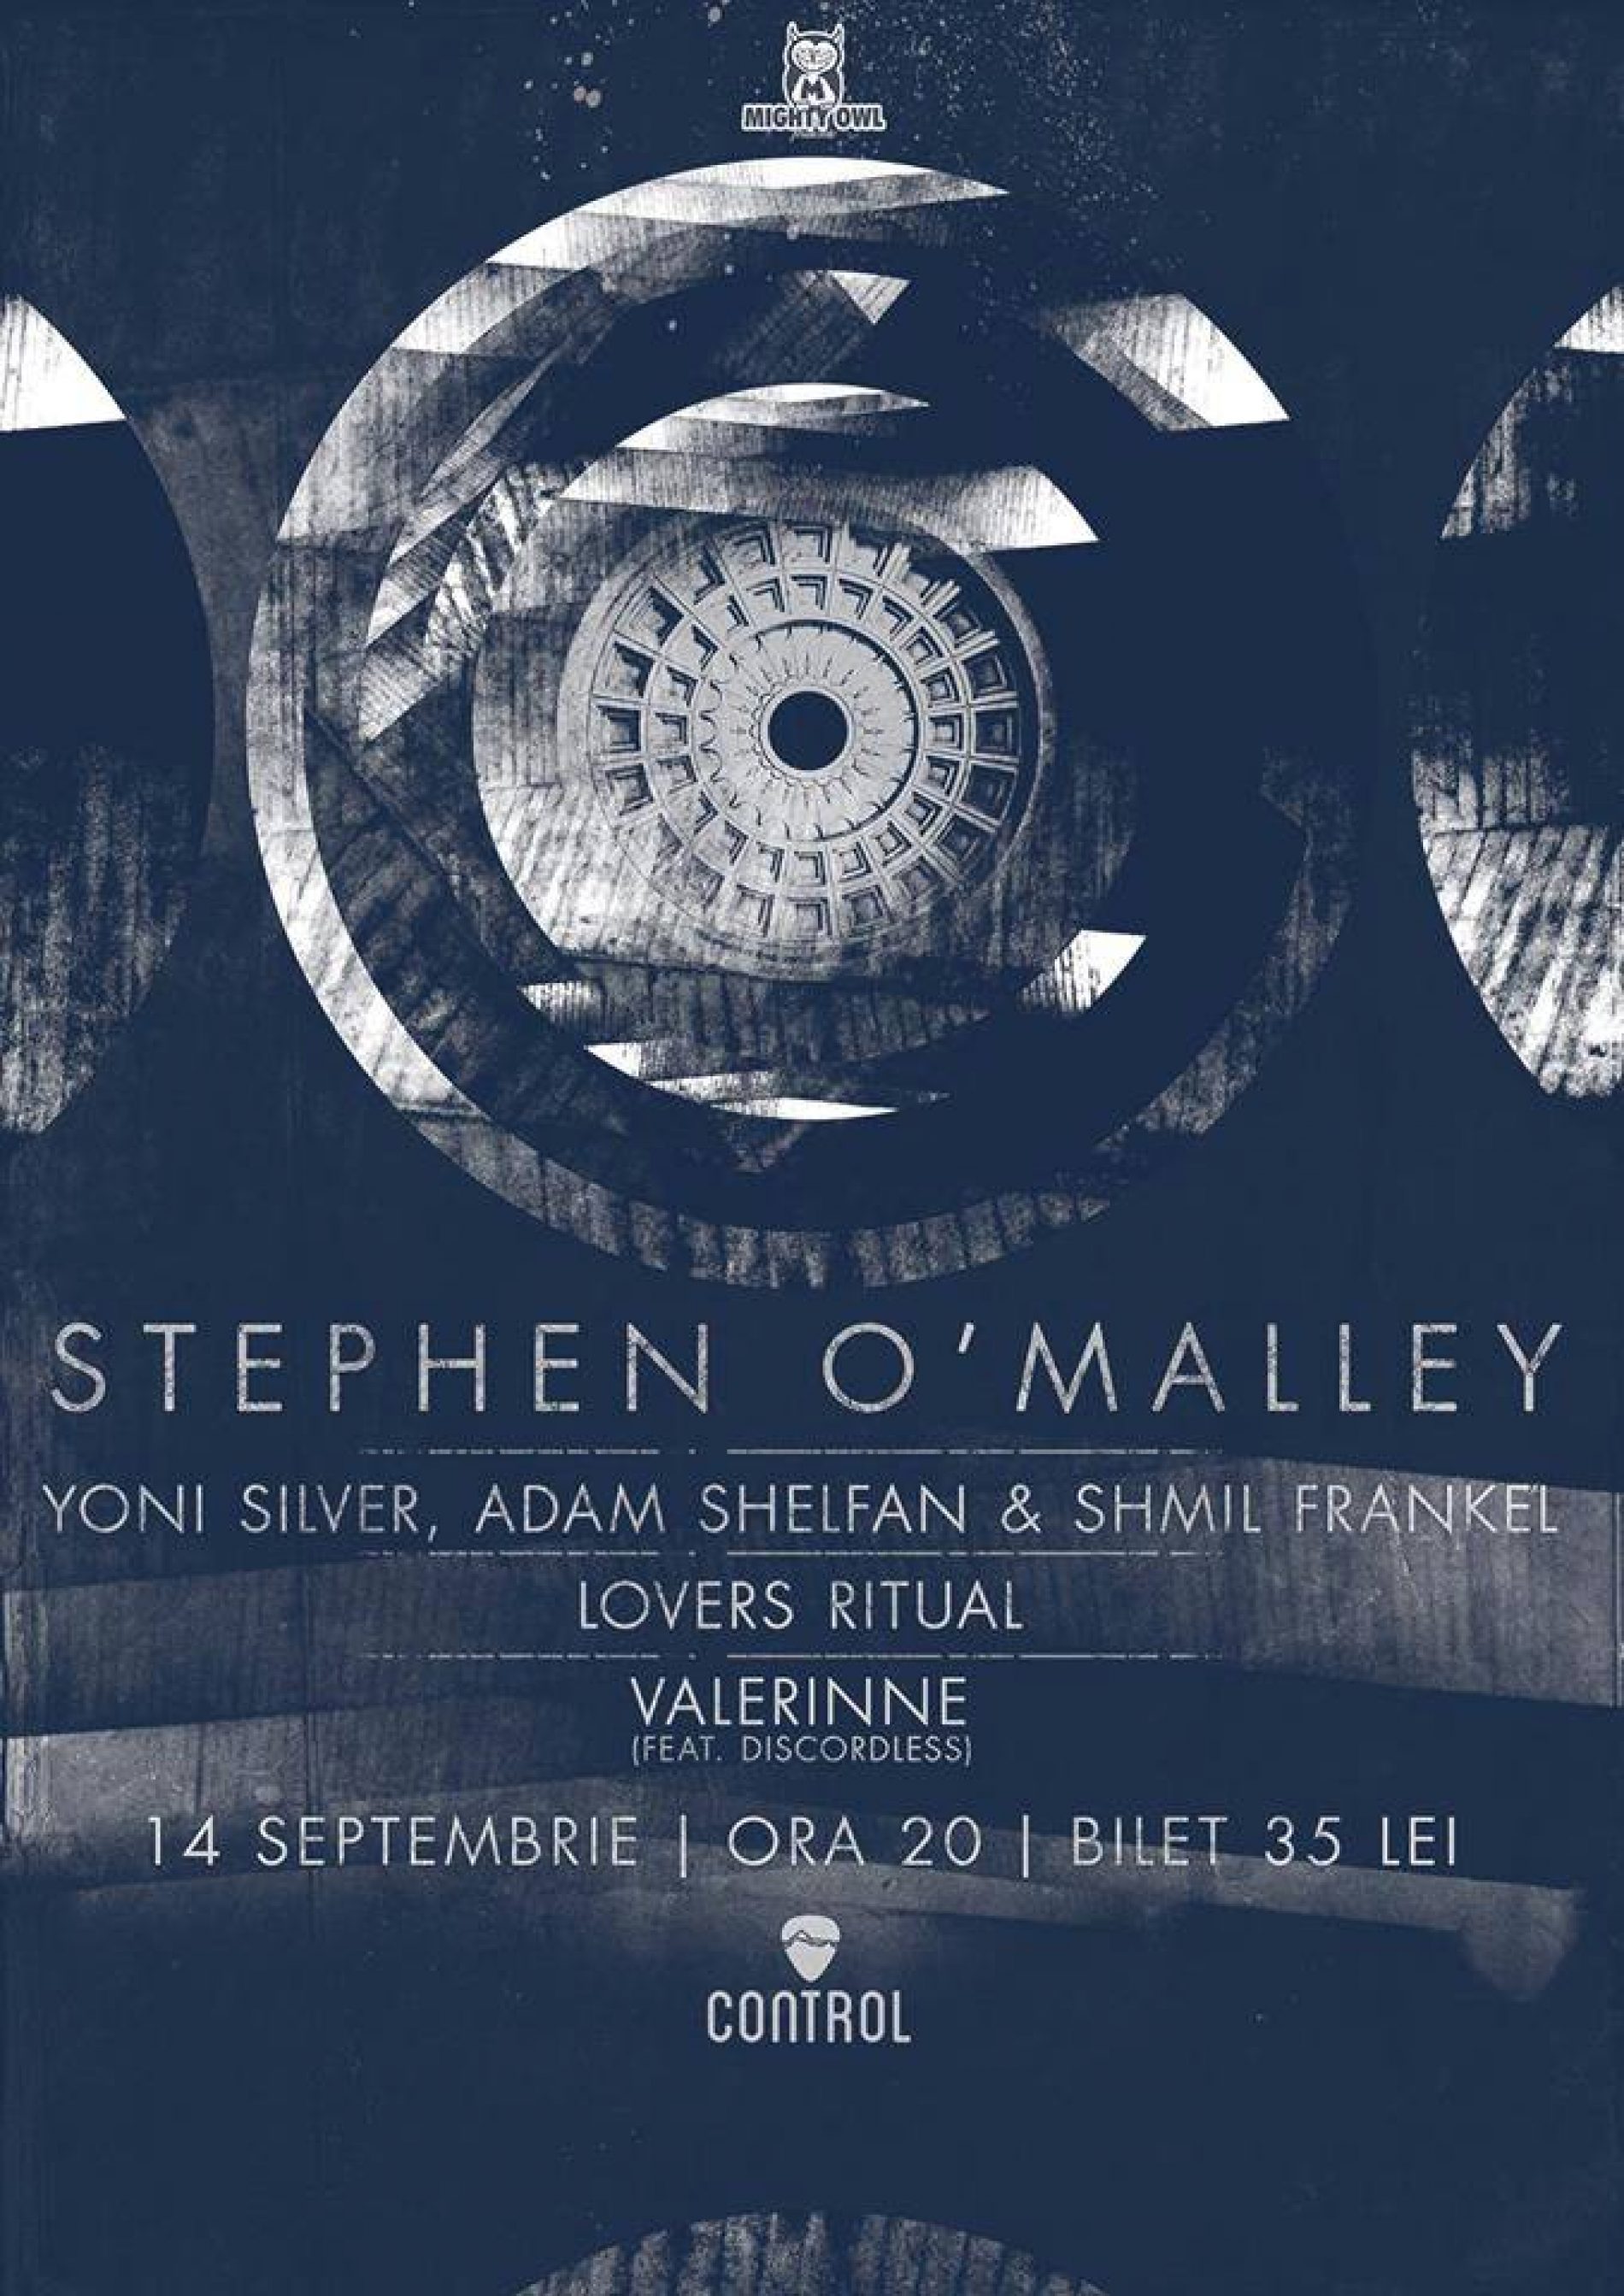 Stephen O’Malley – SUNN O))), Yoni Silver and guests, Lovers Ritual, Valerinne: Concert in Bucuresti